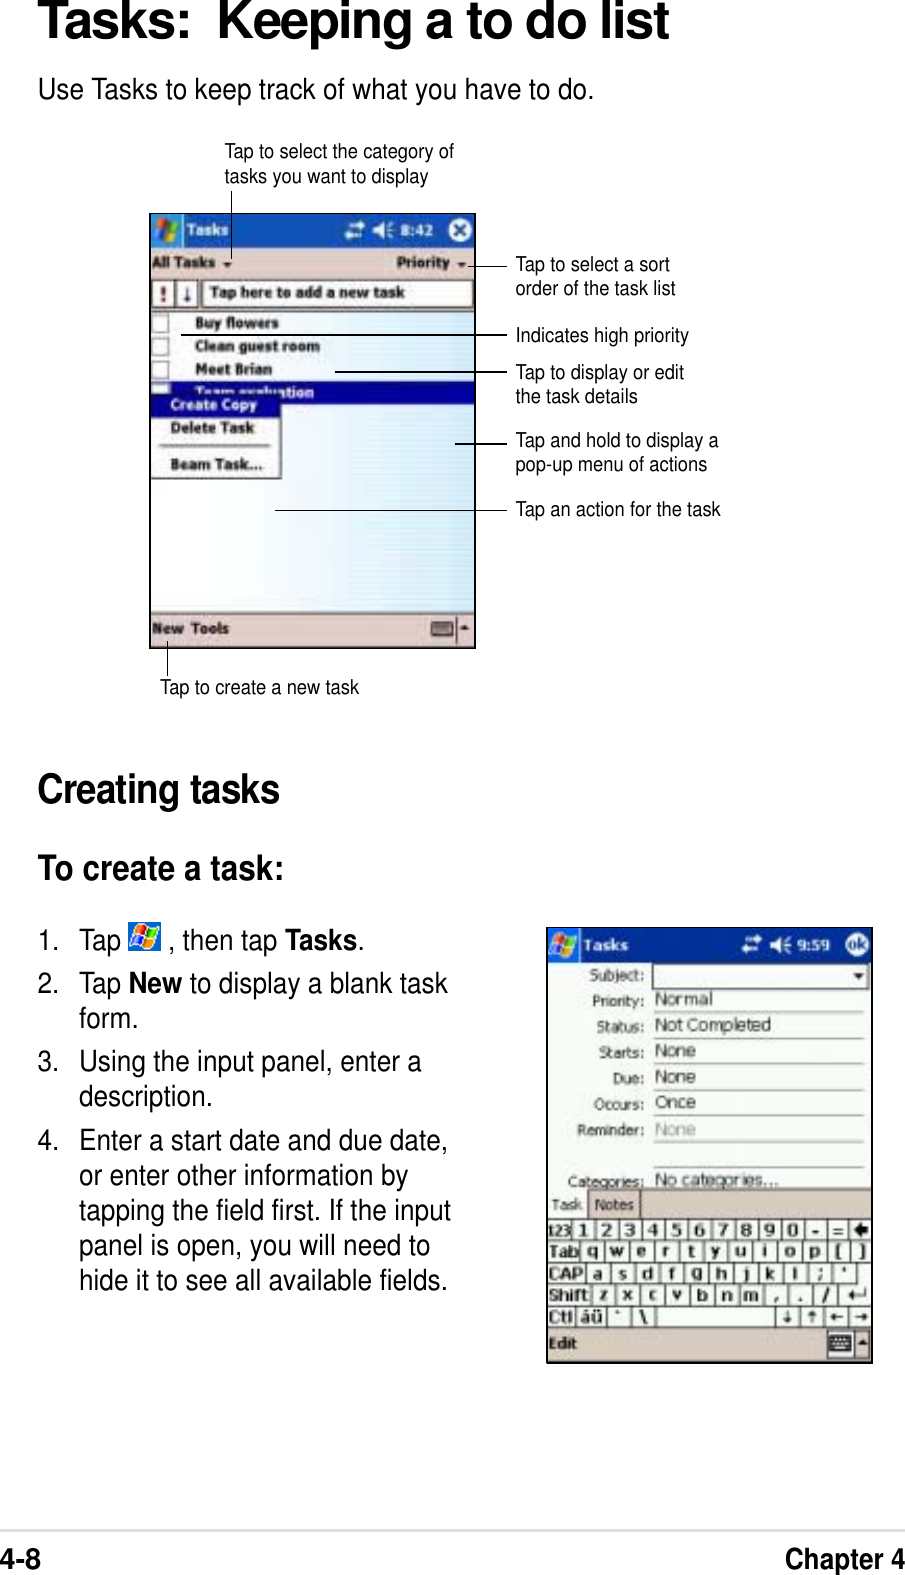 4-8Chapter 4Tasks:  Keeping a to do listUse Tasks to keep track of what you have to do.Creating tasksTo create a task:1. Tap   , then tap Tasks.2. Tap New to display a blank taskform.3. Using the input panel, enter adescription.4. Enter a start date and due date,or enter other information bytapping the field first. If the inputpanel is open, you will need tohide it to see all available fields.Tap to select a sortorder of the task listTap to select the category oftasks you want to displayIndicates high priorityTap to display or editthe task detailsTap and hold to display apop-up menu of actionsTap an action for the taskTap to create a new task